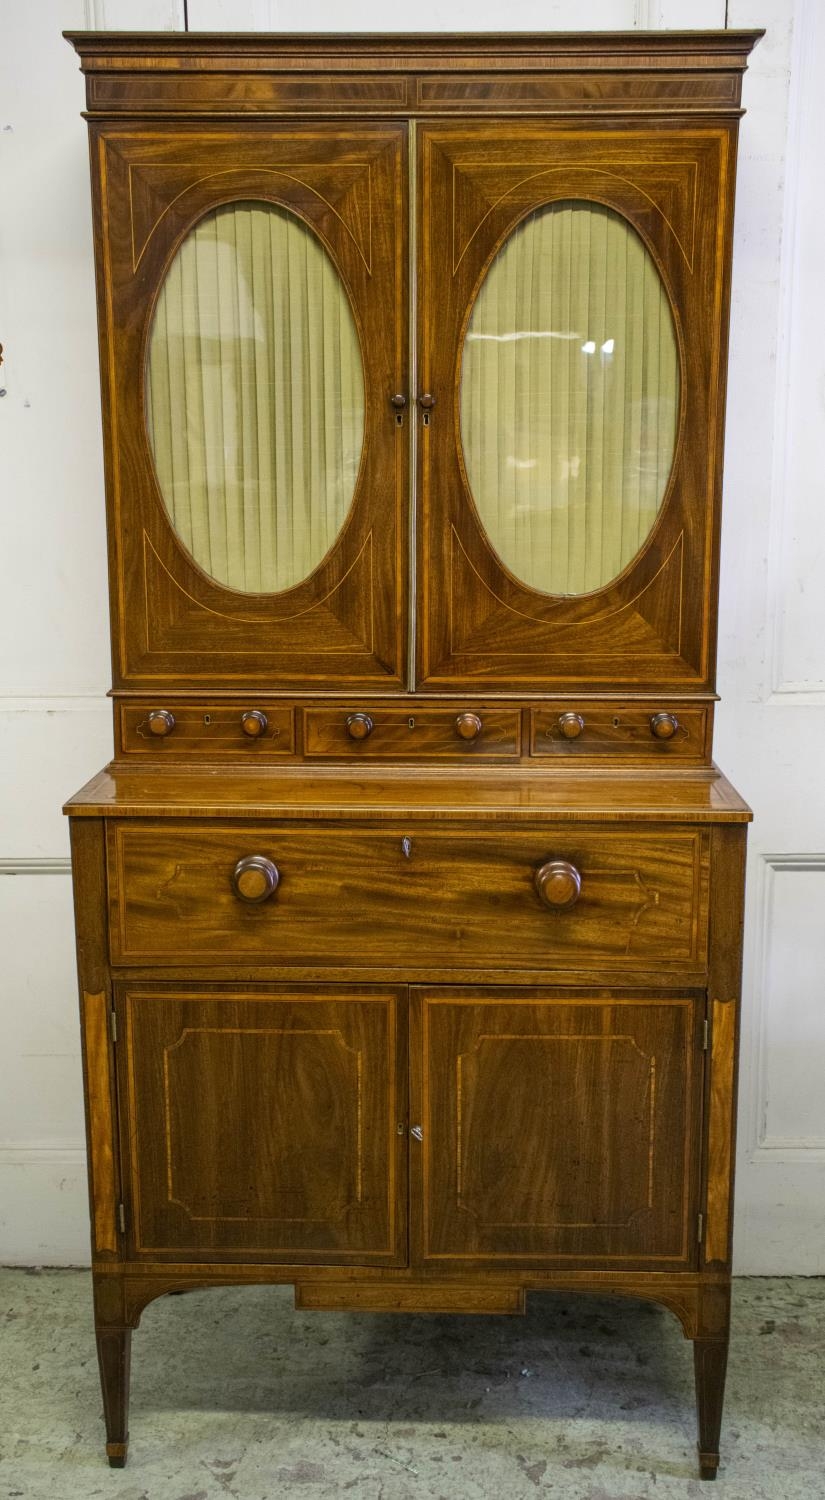 SECRETAIRE CABINET, 190cm H x 87cm W x 49cm D, George III mahogany and satinwood, circa 1800, with